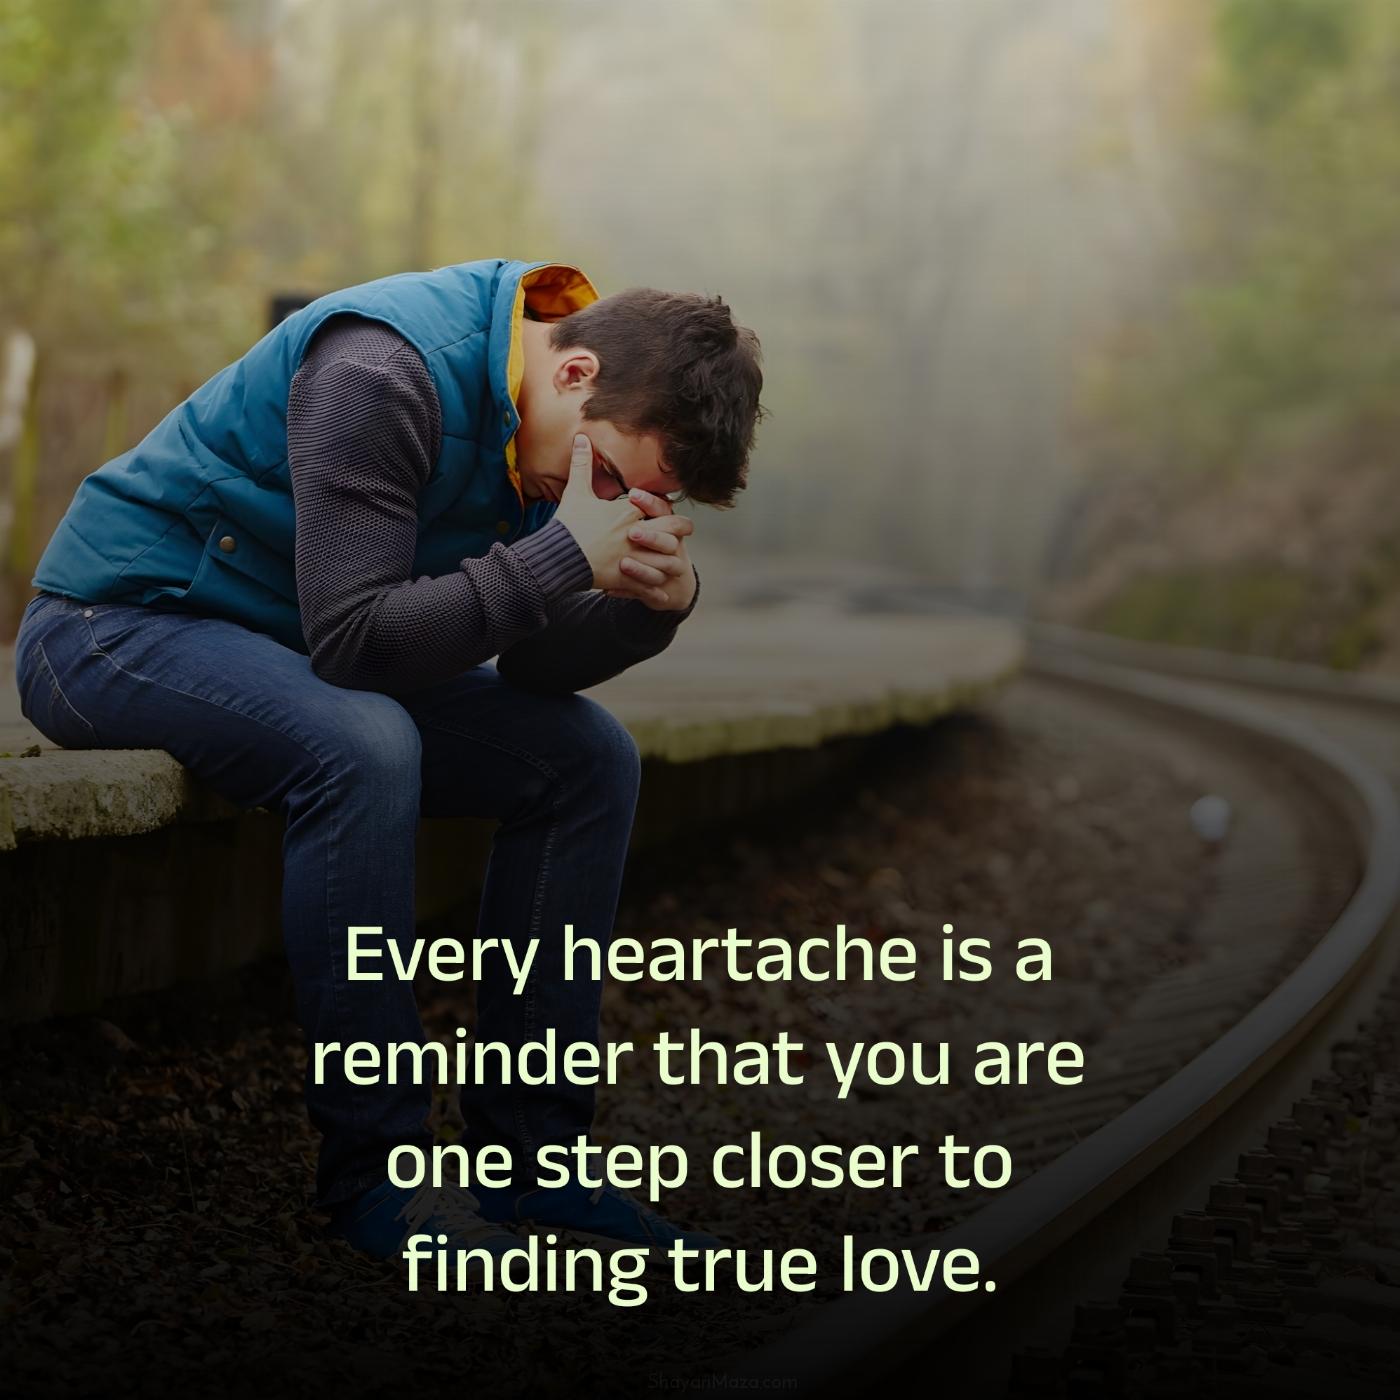 Every heartache is a reminder that you are one step closer